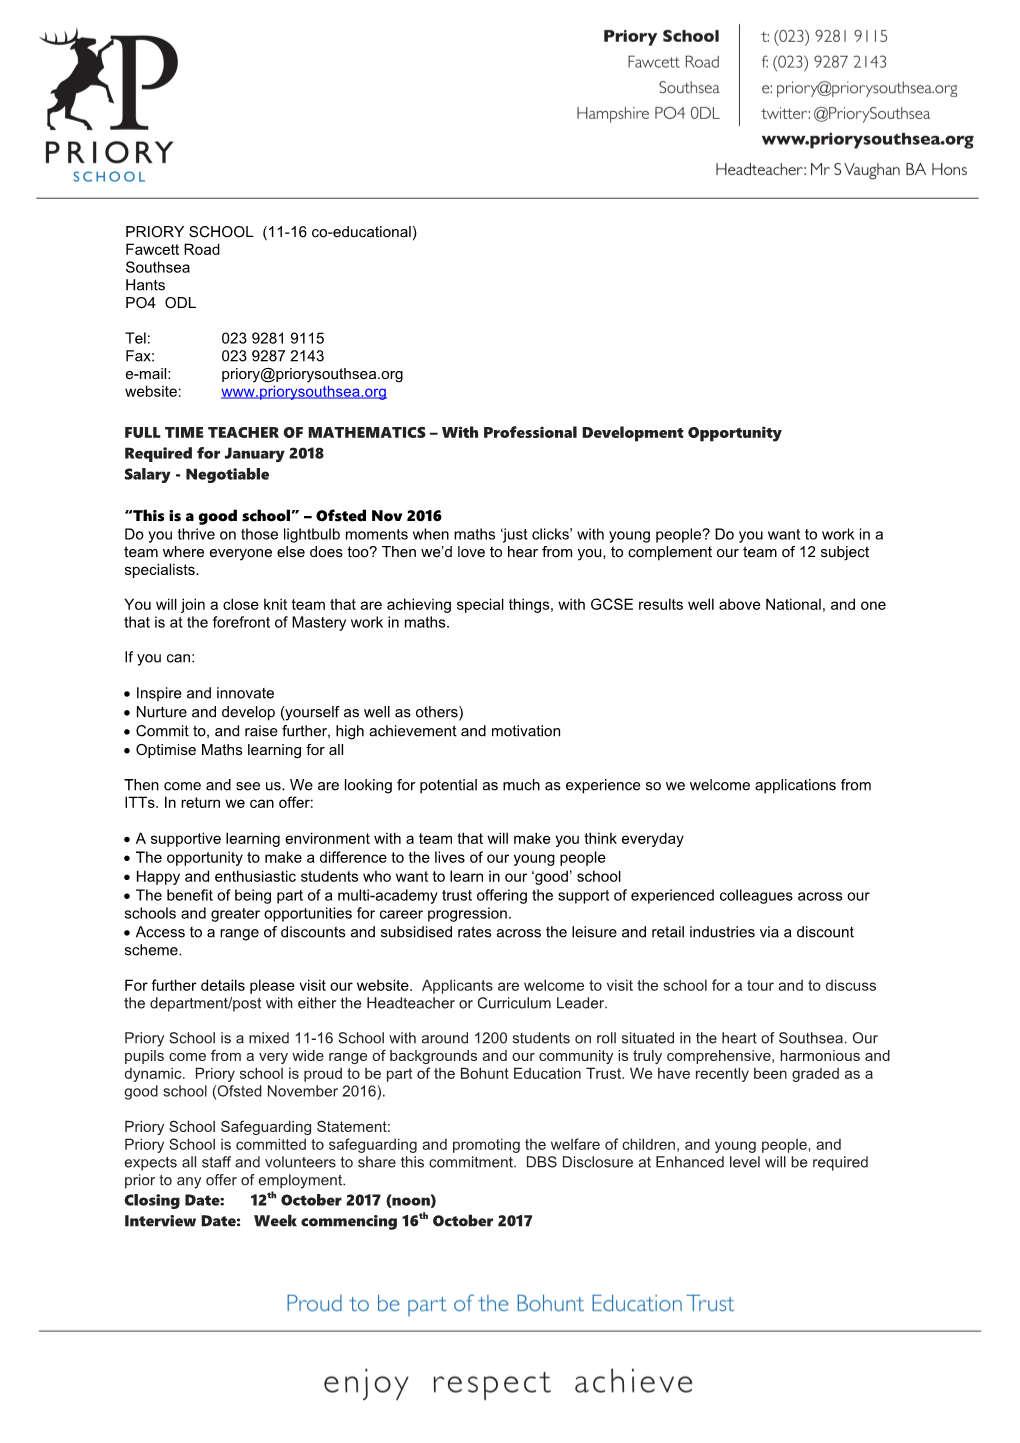 FULL TIME TEACHER of MATHEMATICS with Professional Development Opportunity